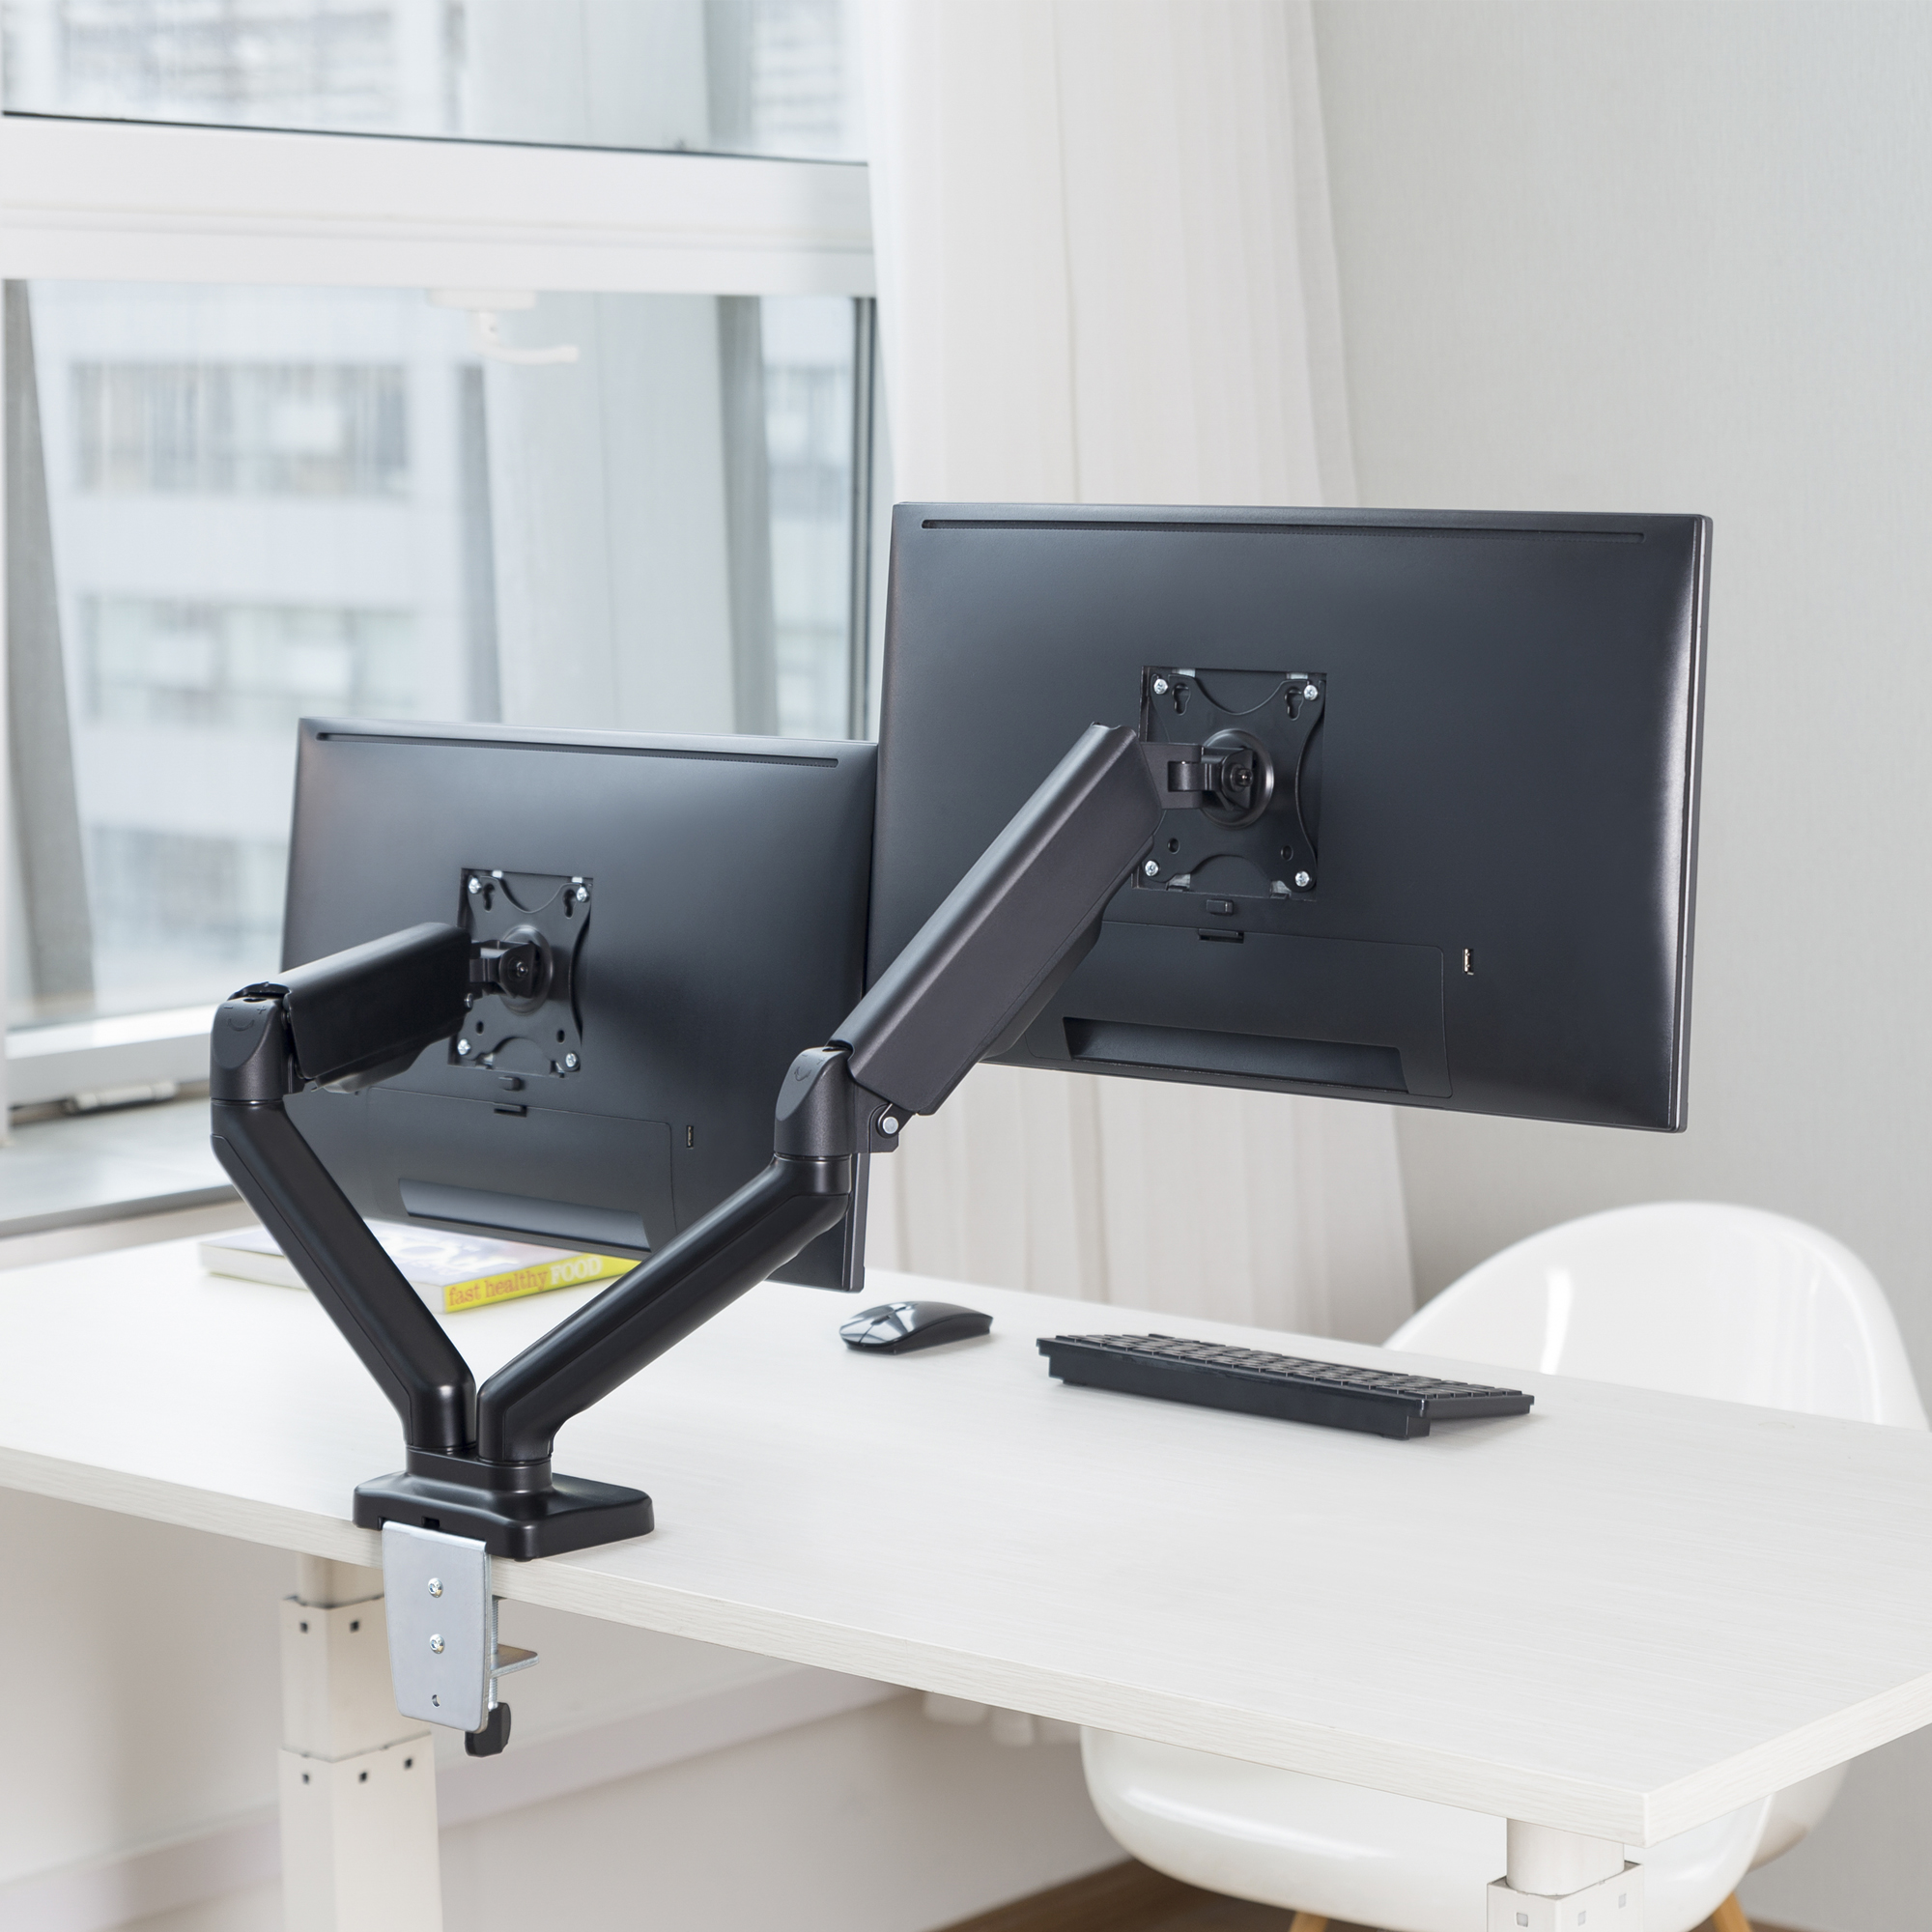 A large marketing image providing additional information about the product mbeat Activiva ErgoLife Dual Monitor Steel Gas Spring Monitor Arm - Additional alt info not provided